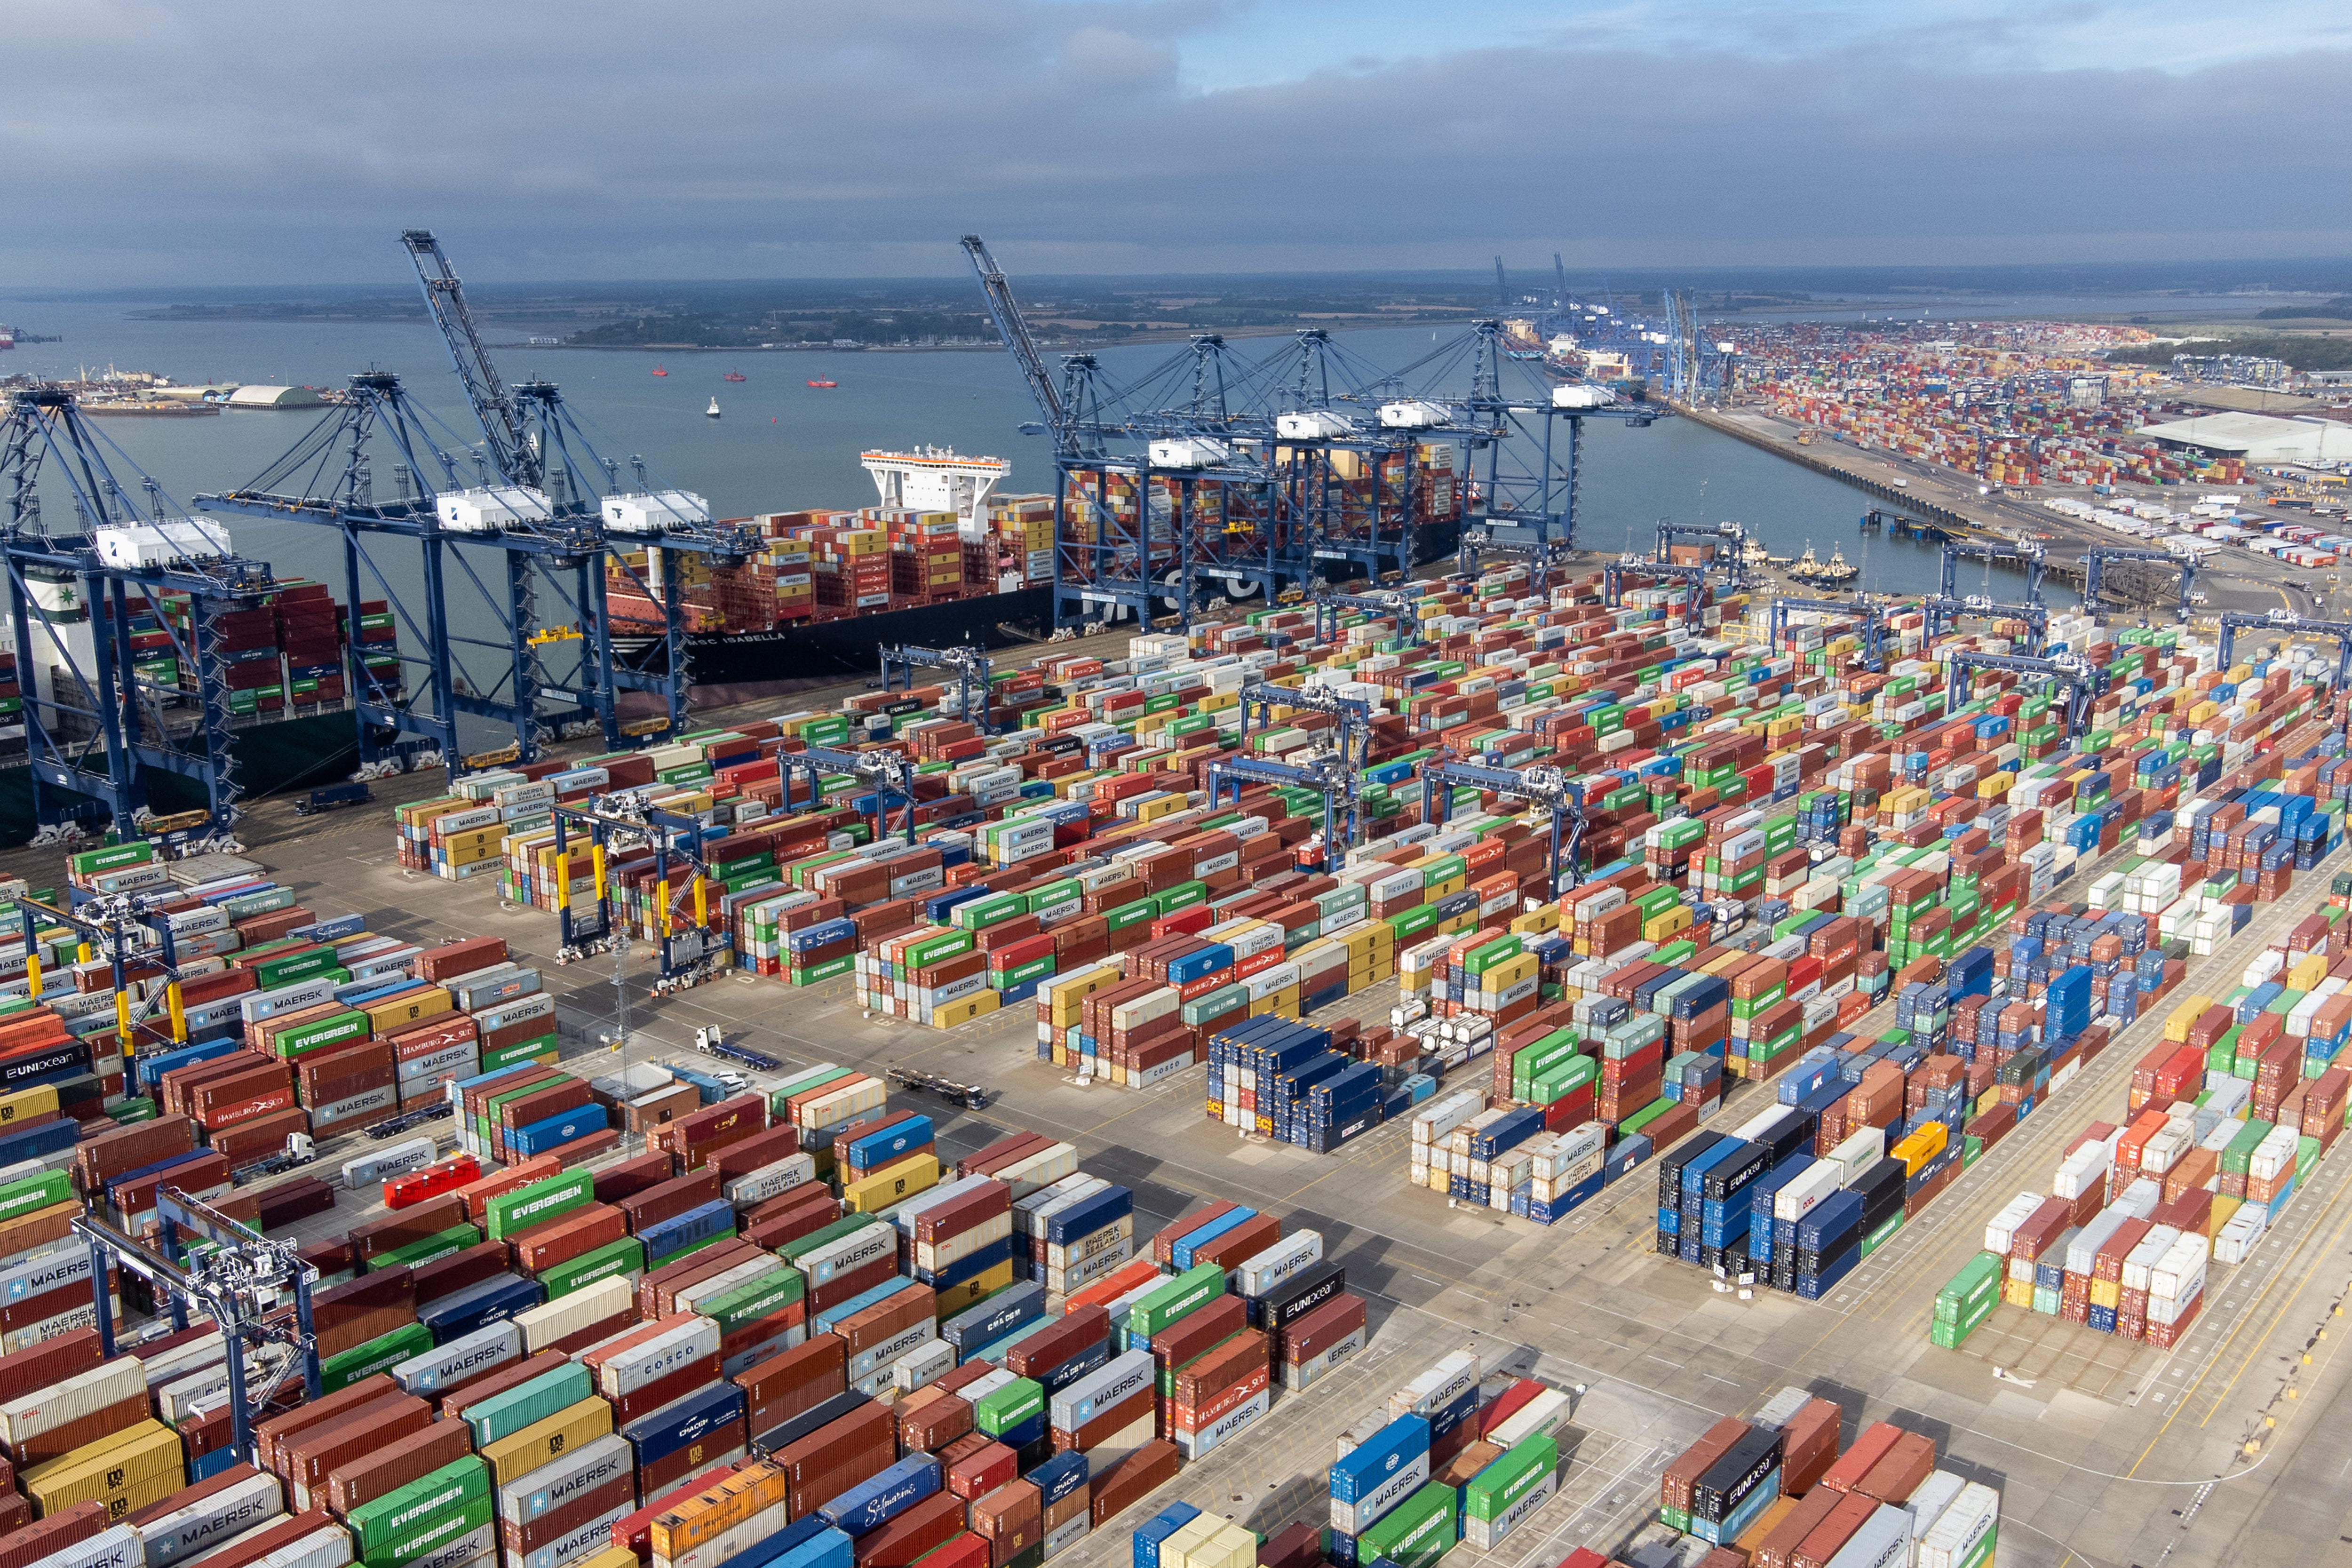 Thousands of shipping containers at the Port of Felixstowe in Suffolk